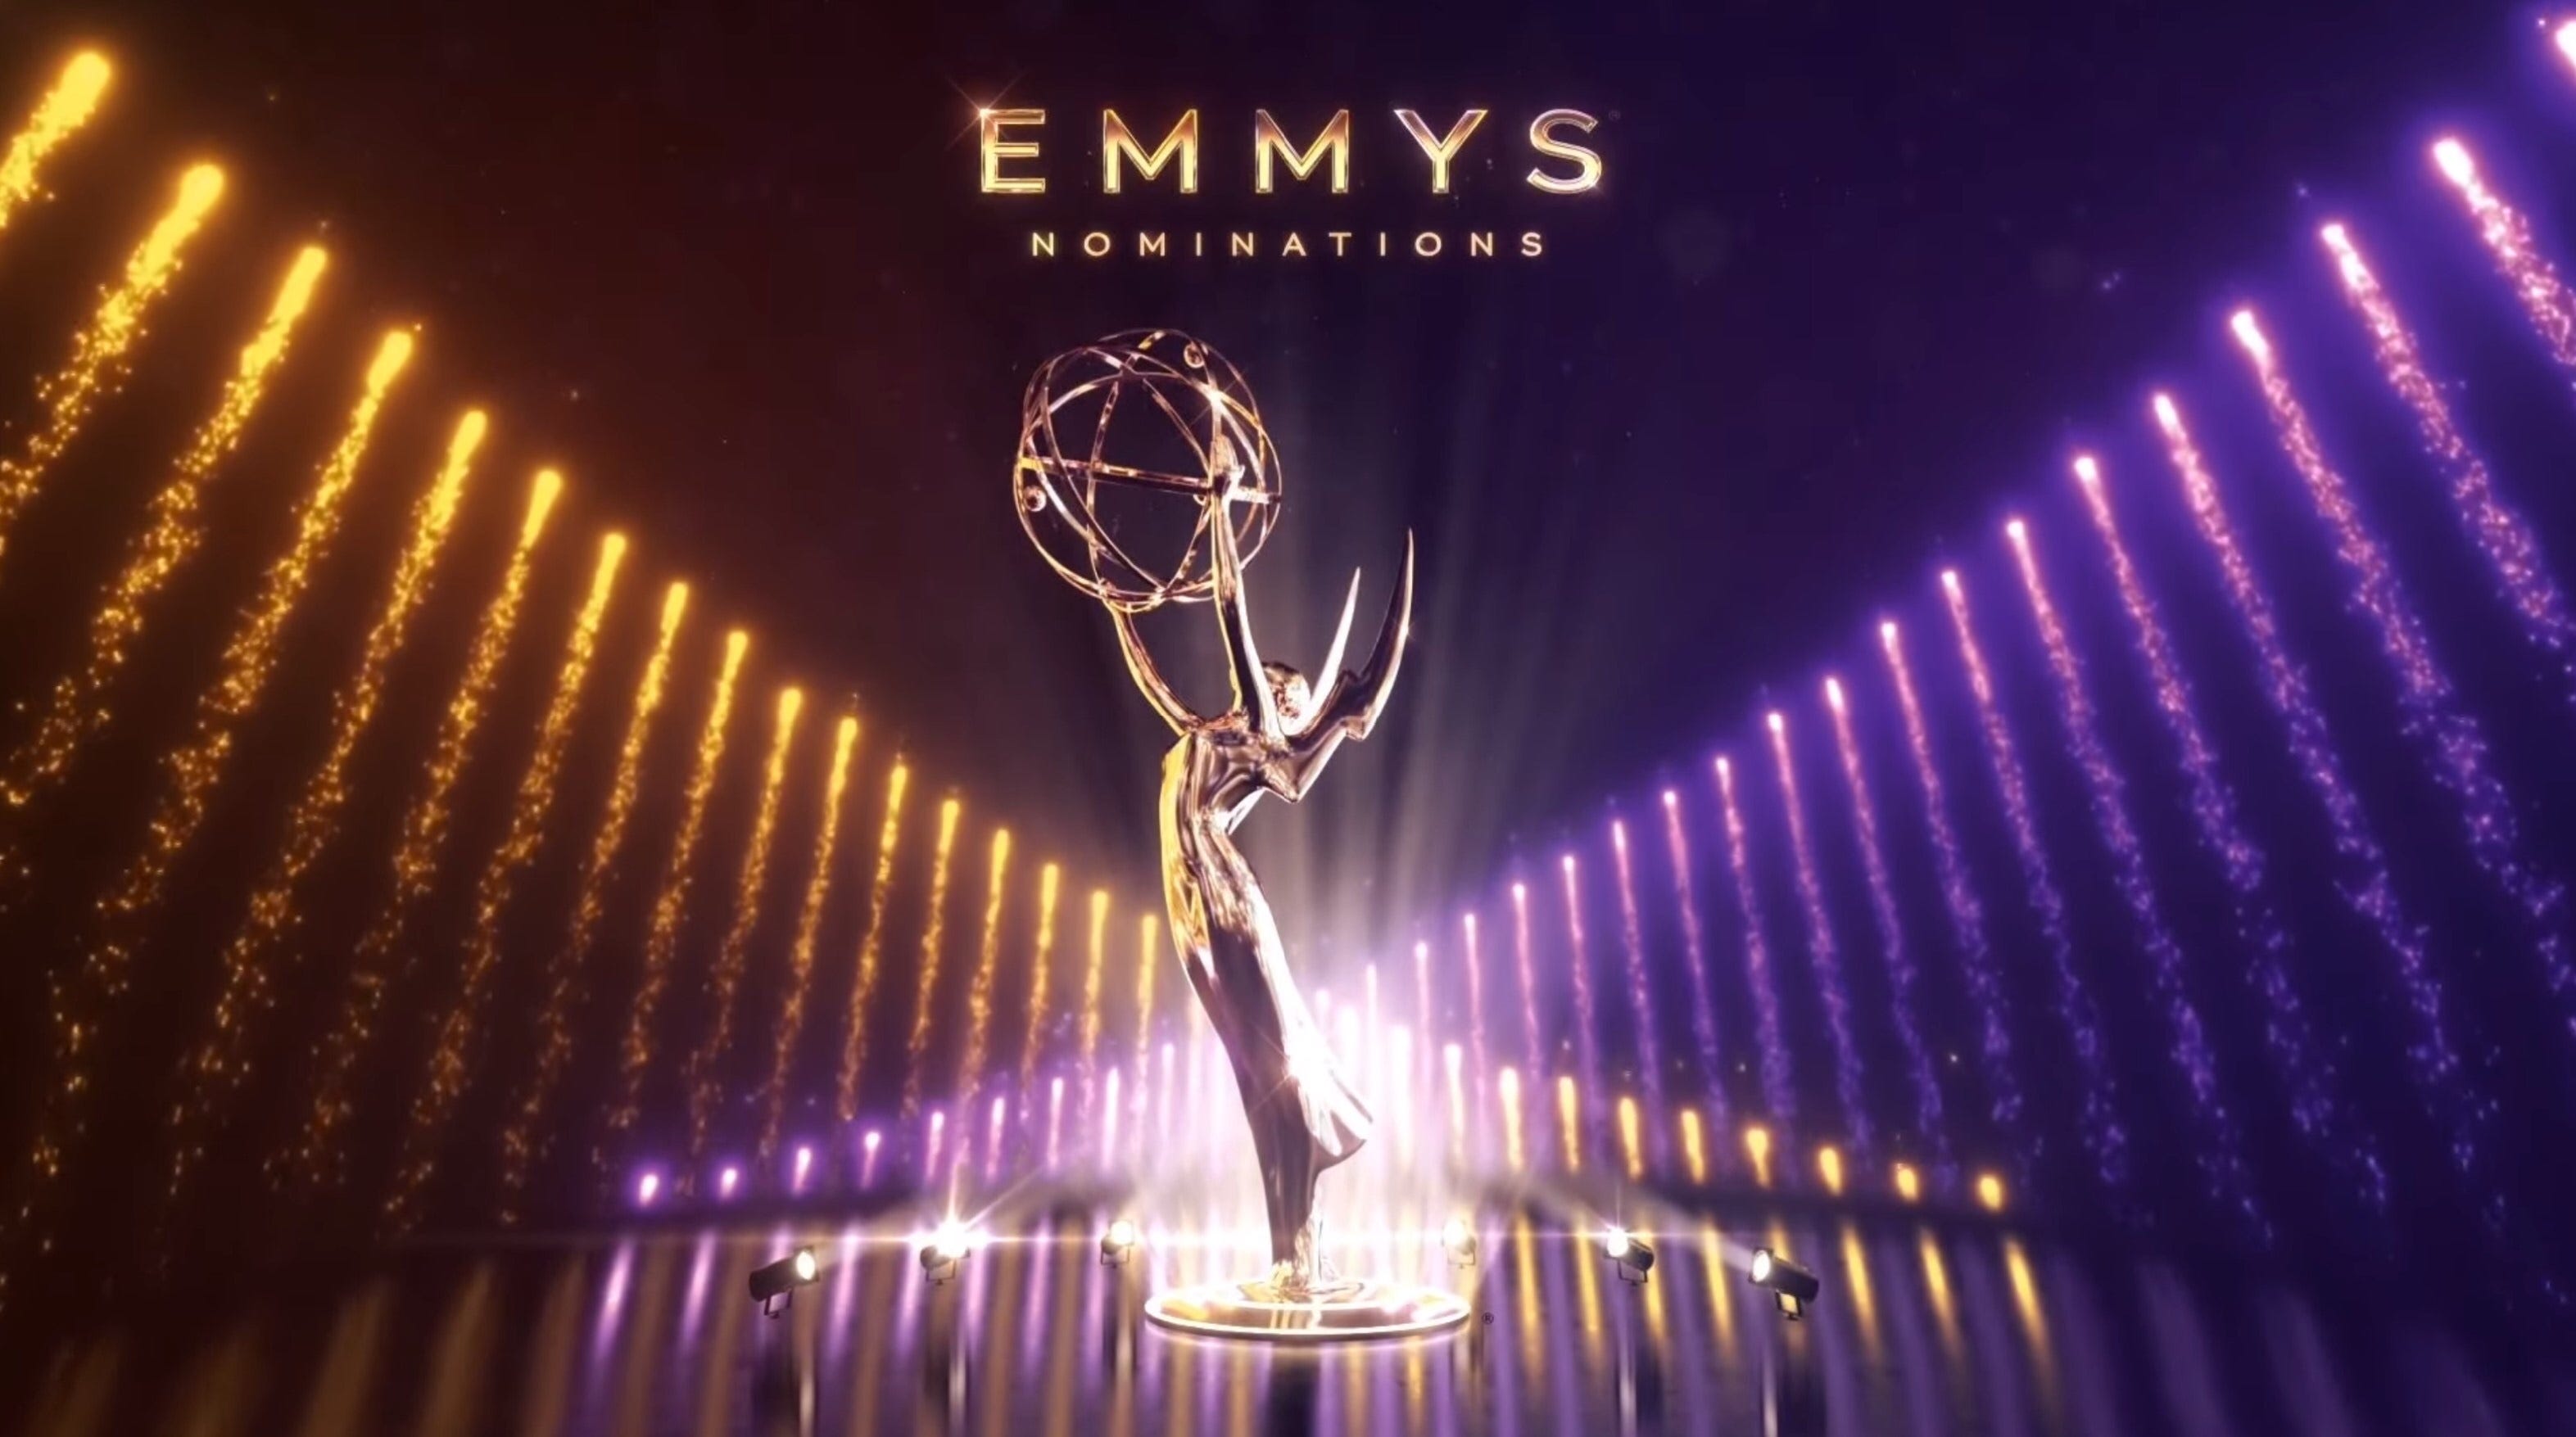 What to Expect at the 71st Annual Primetime Emmy Awards